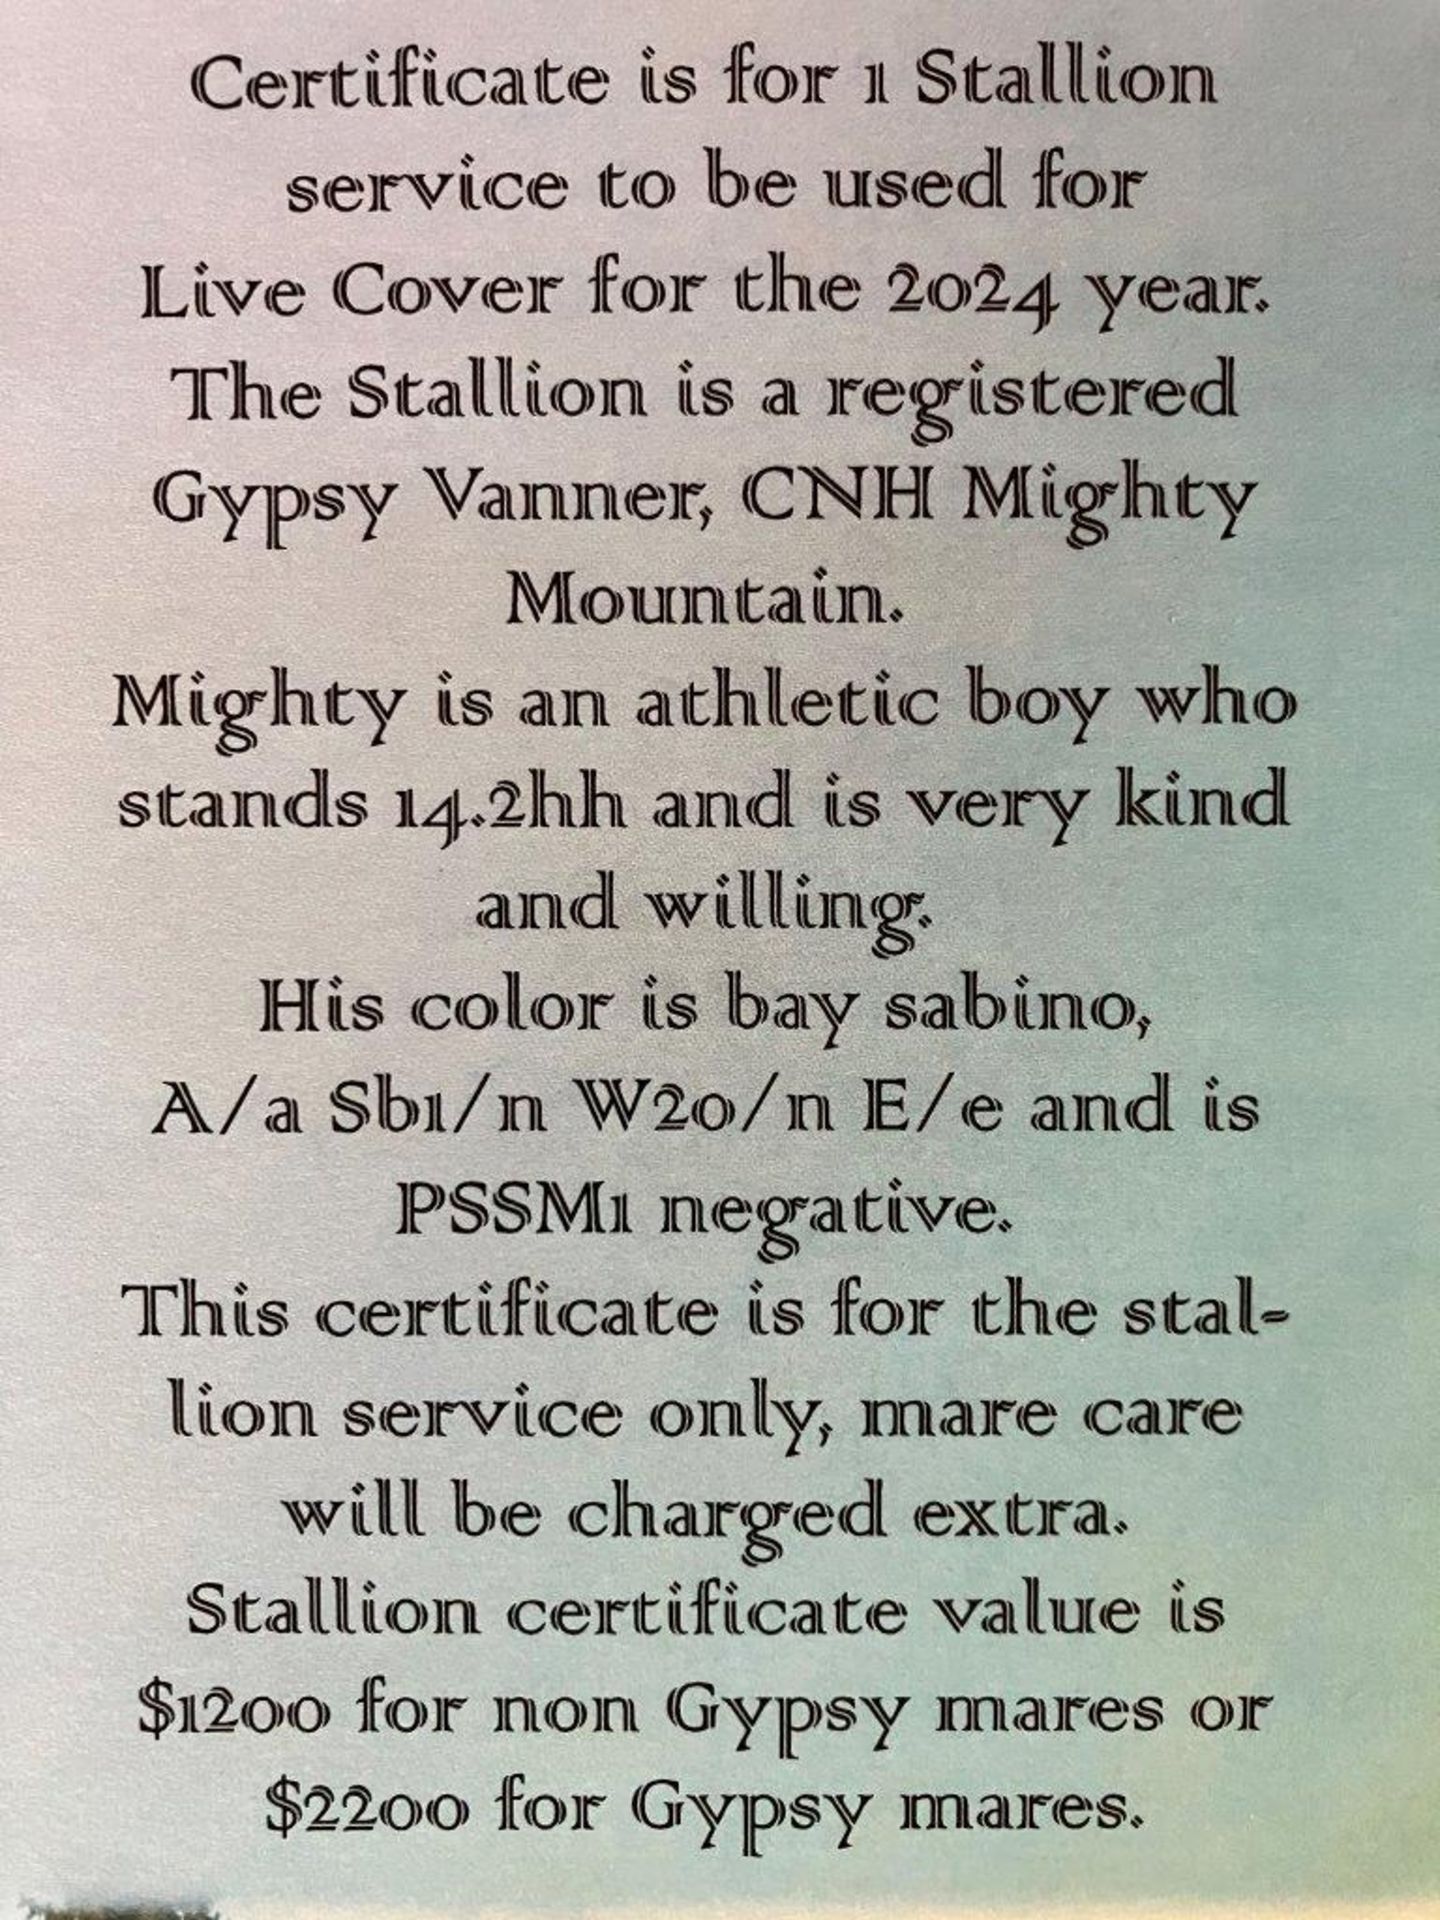 CNH GIFT CERTIFICATE FOR 1 GYPSY STALLION SERVICE (LIVE COVER ) - Image 3 of 3